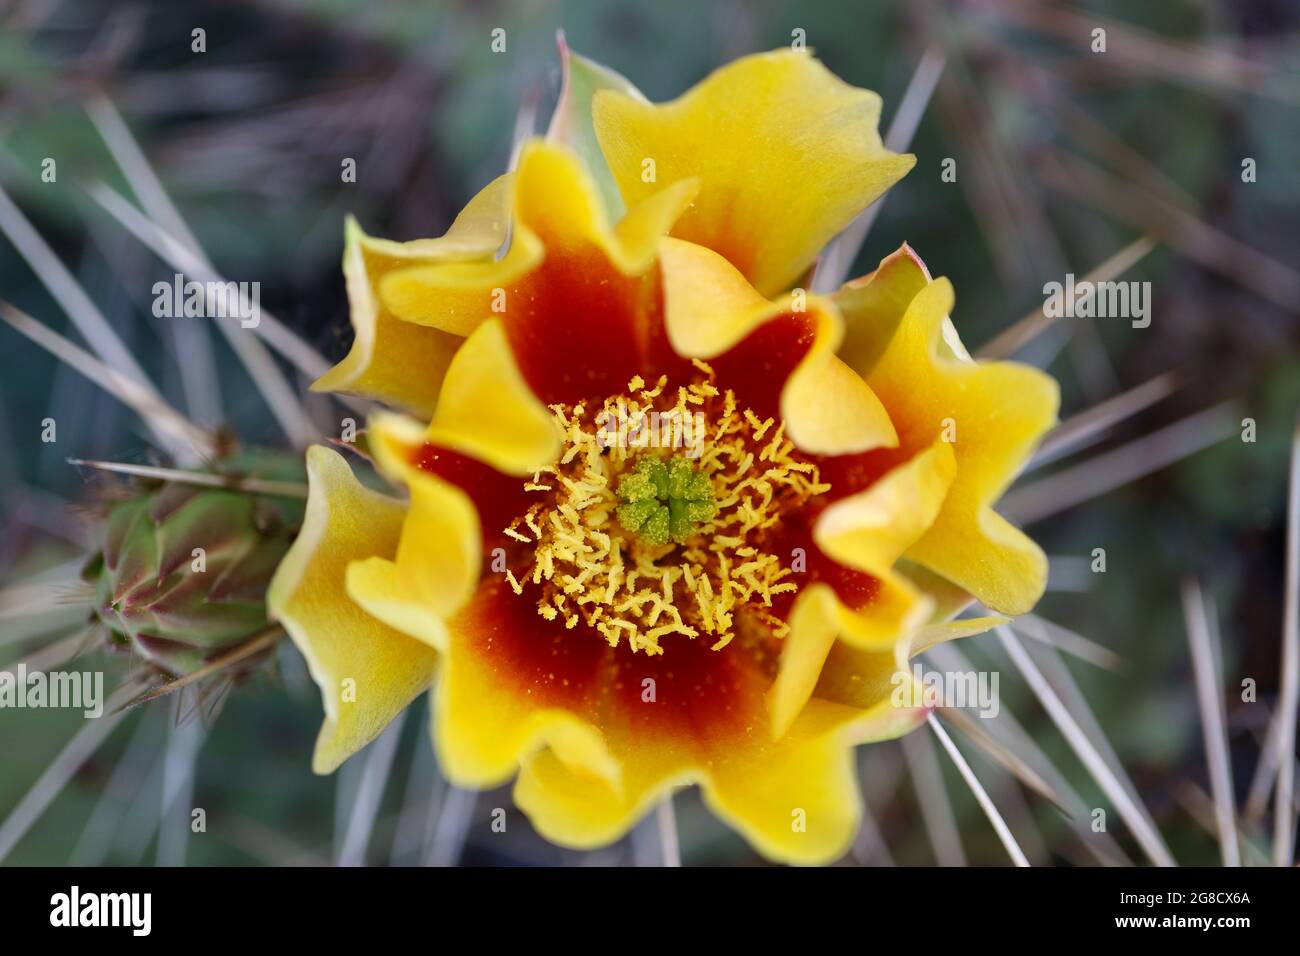 Cactus flower with delicate petals and buds, cactus flower with yellow - red petals and white stamens, cactus with thorns, beauty in nature, floral Stock Photo